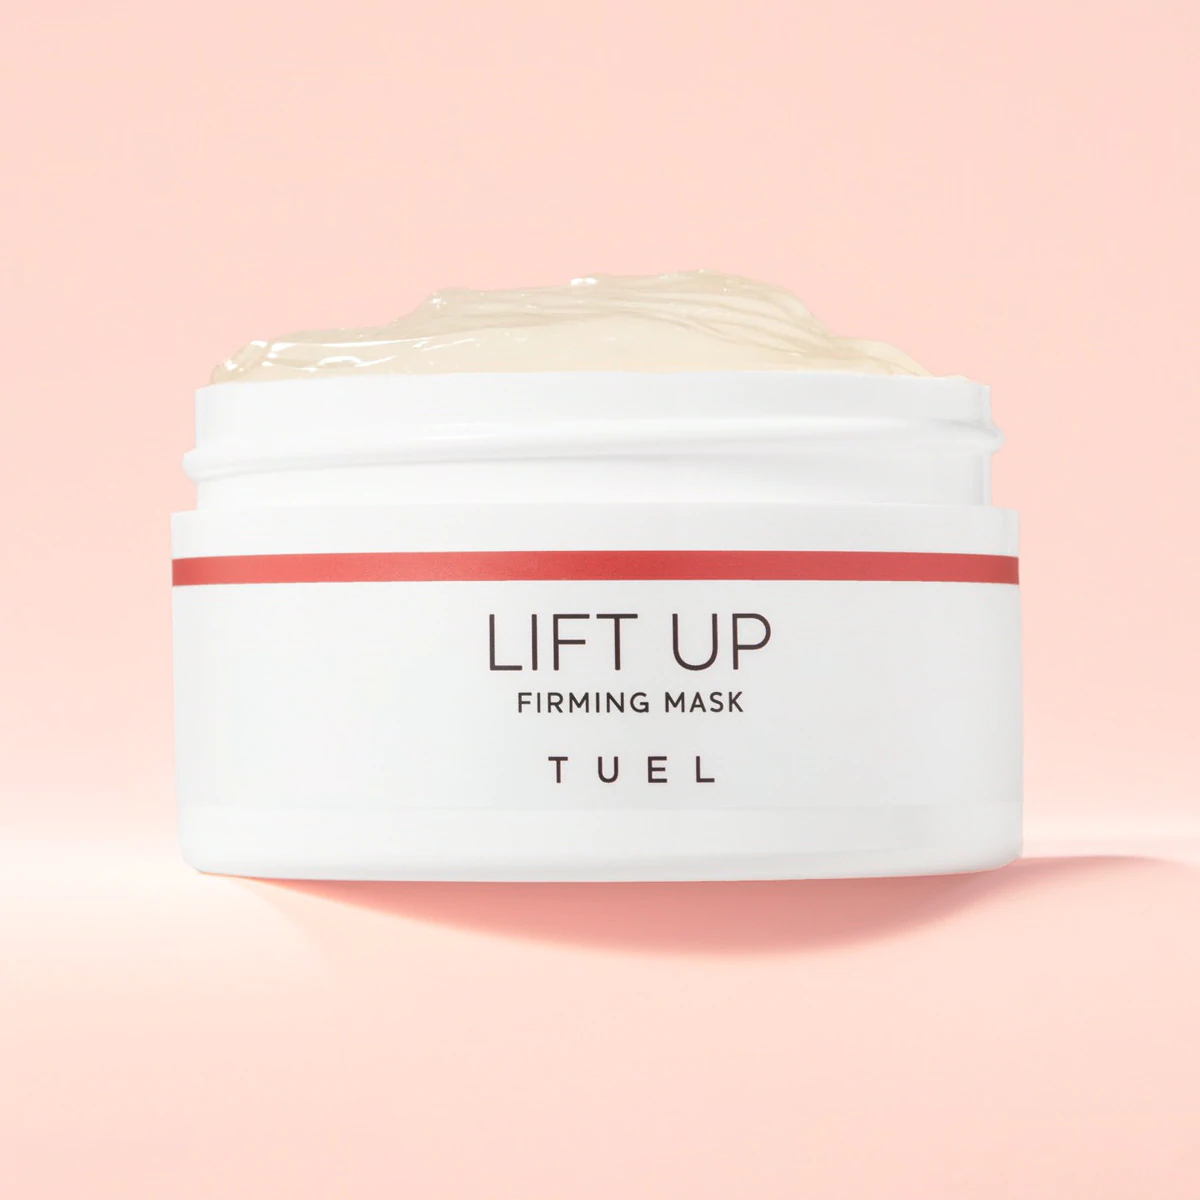 Lift Up Firming Mask - Pro Size